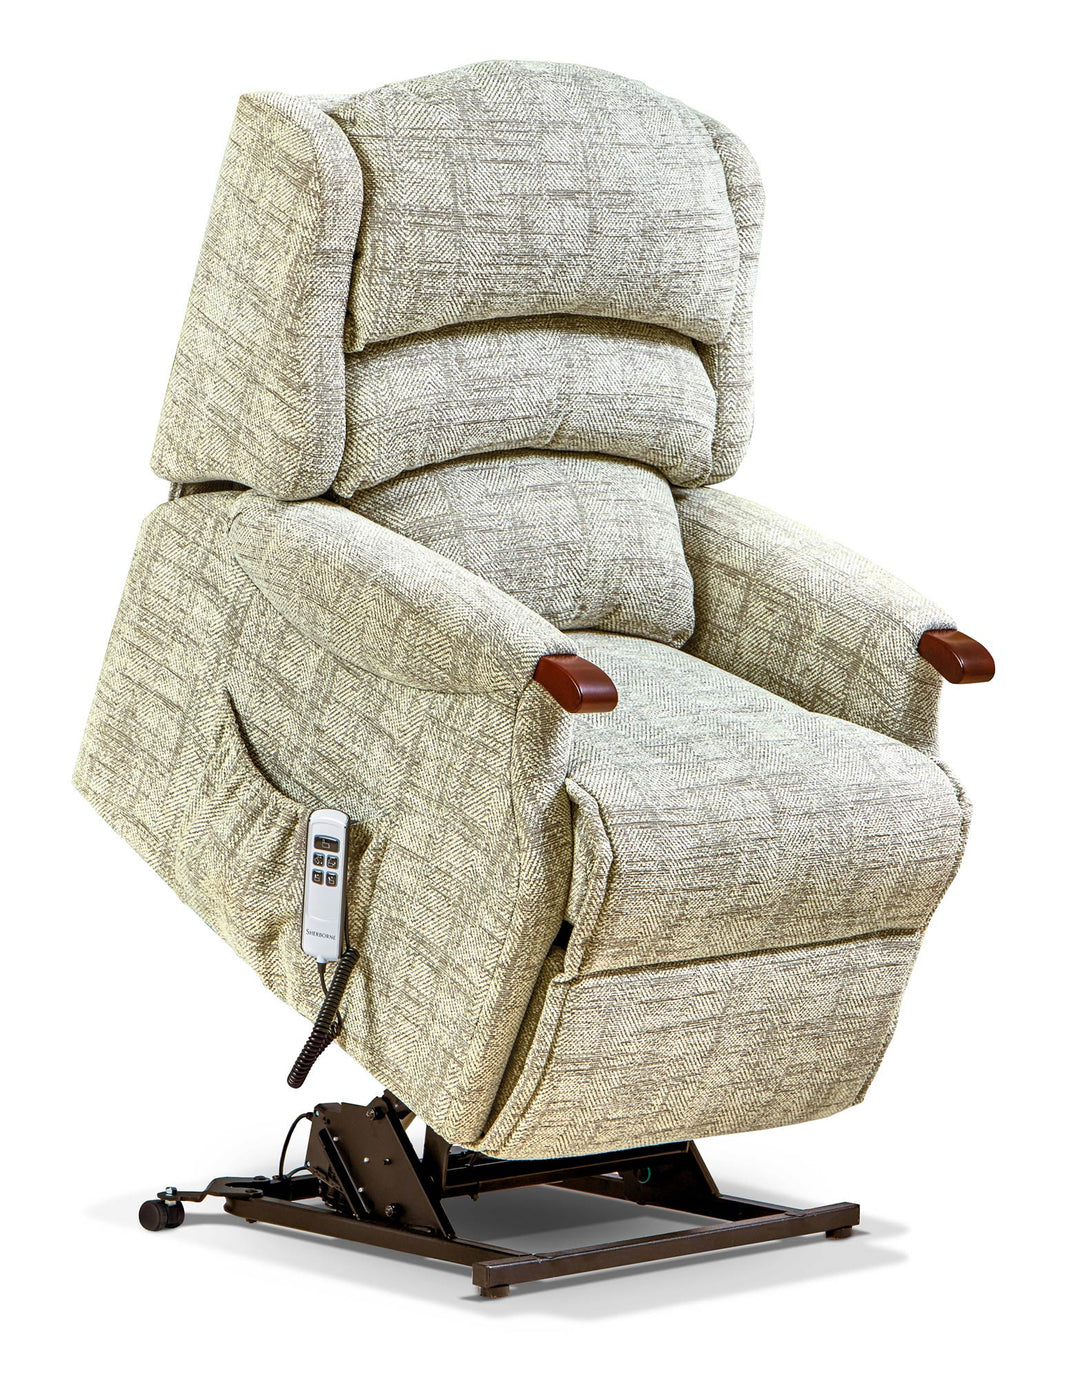 Warwick Armchair Recliner and Electric Riser Collection